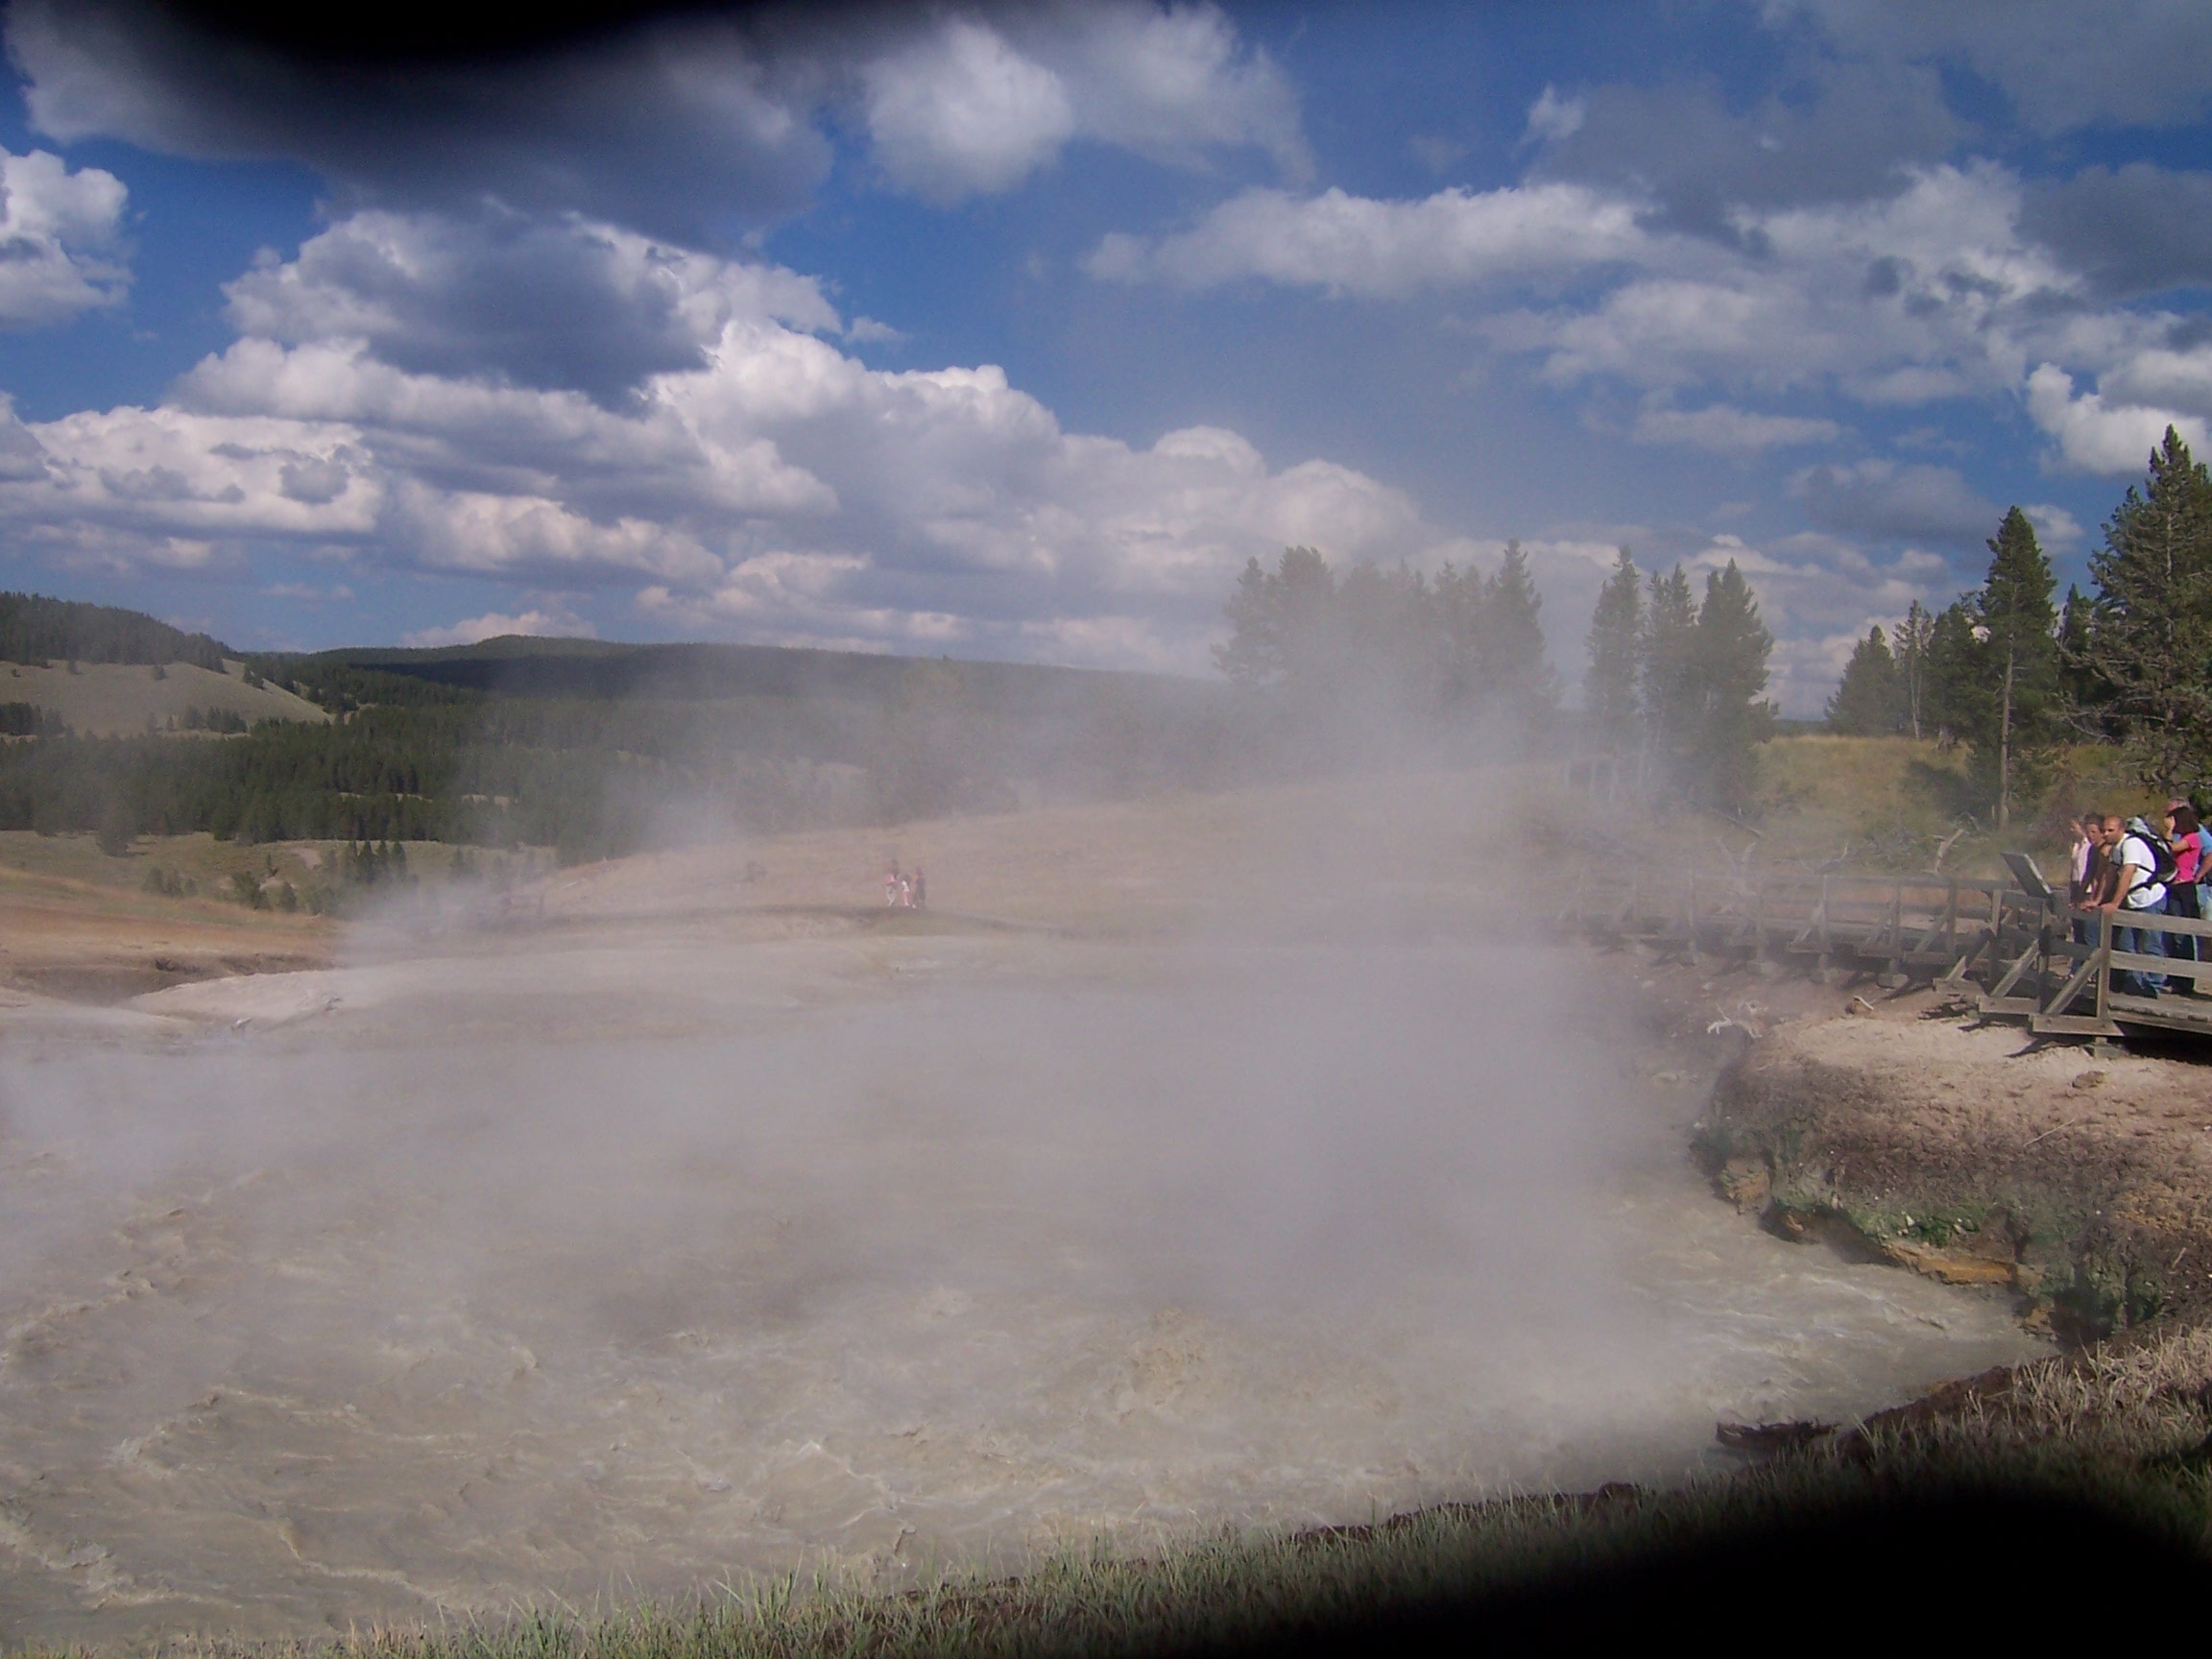 A larger hot spring.